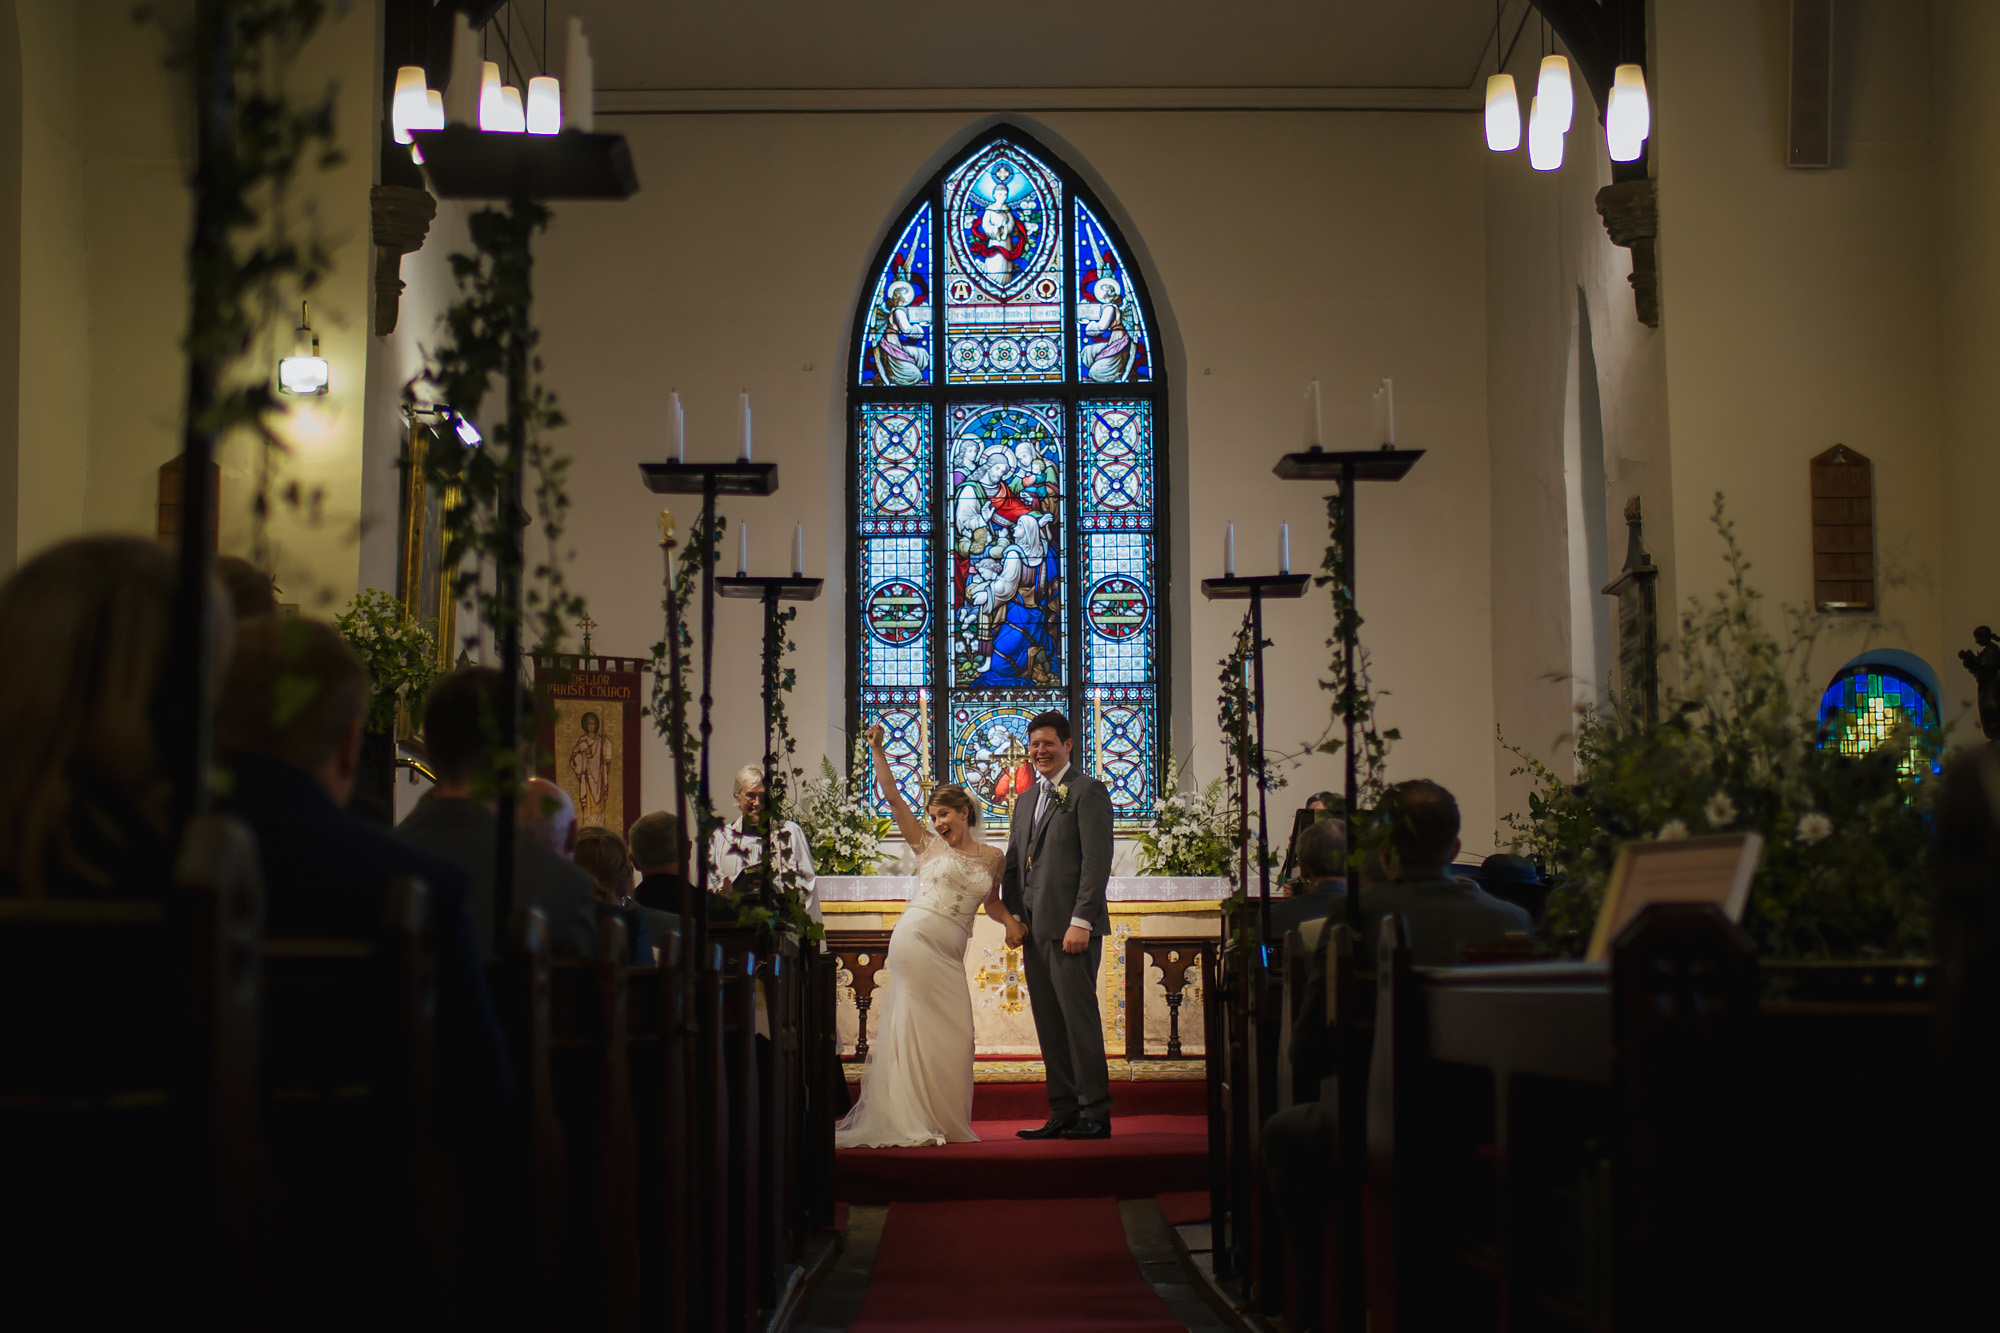 Bride and groom happy at their church ceremony in front of a stained glass window